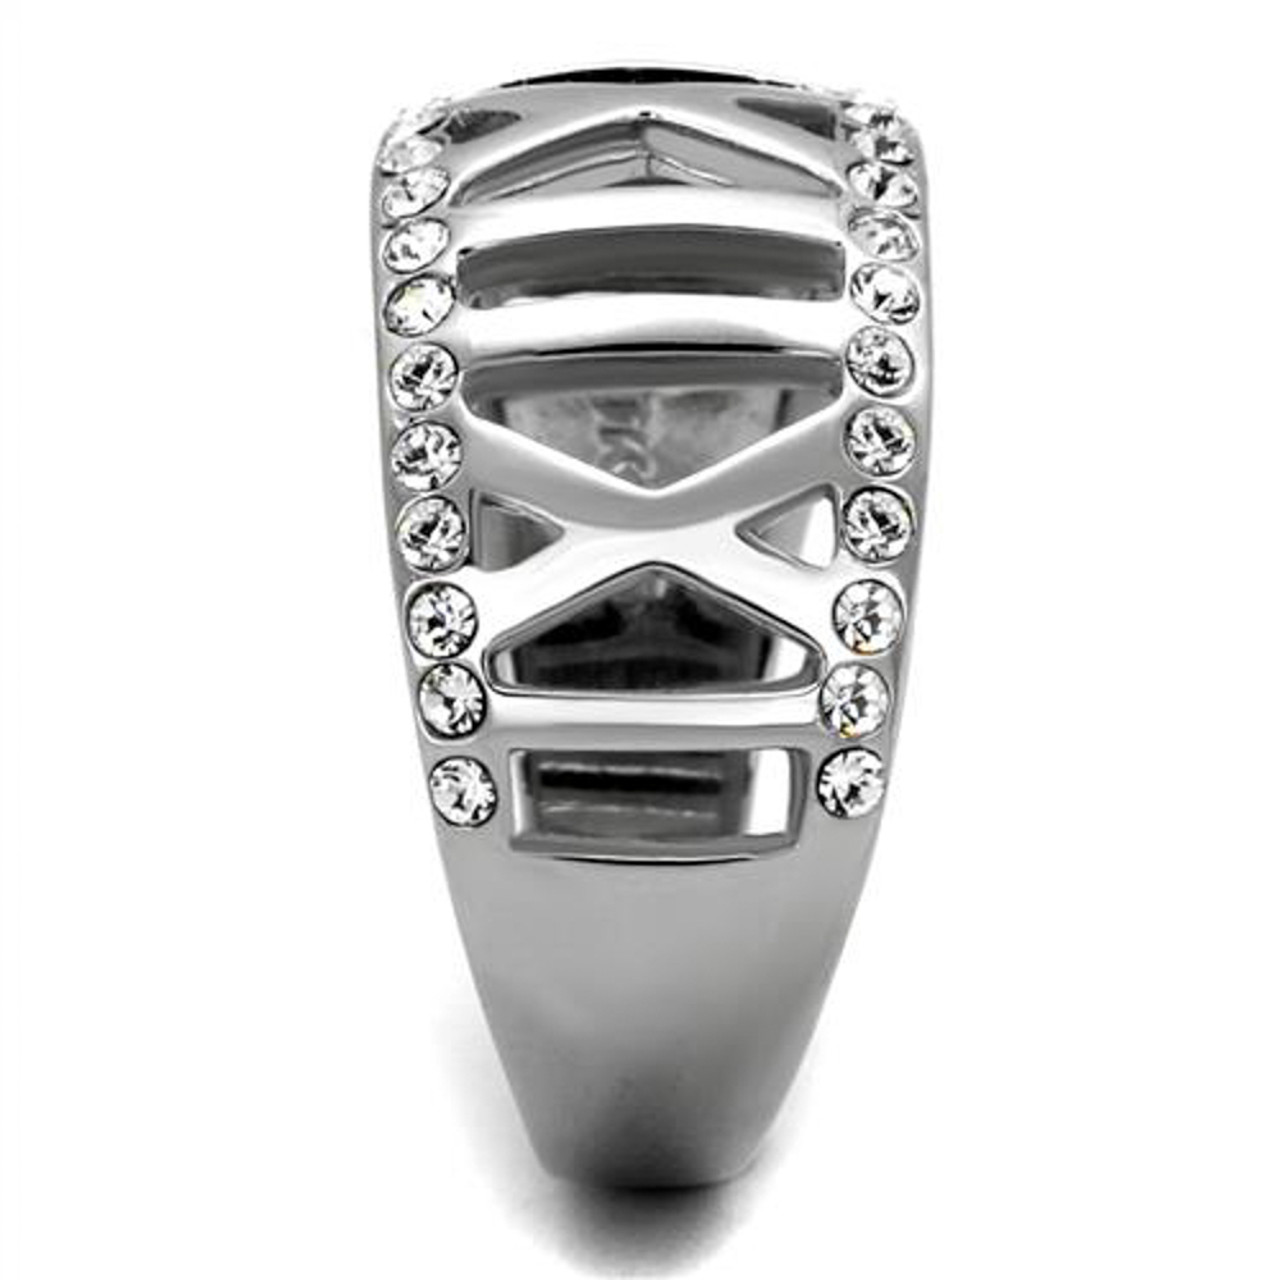 ARTK2257 Stainless Steel Women's Roman Numeral Crystal Anniversary Ring